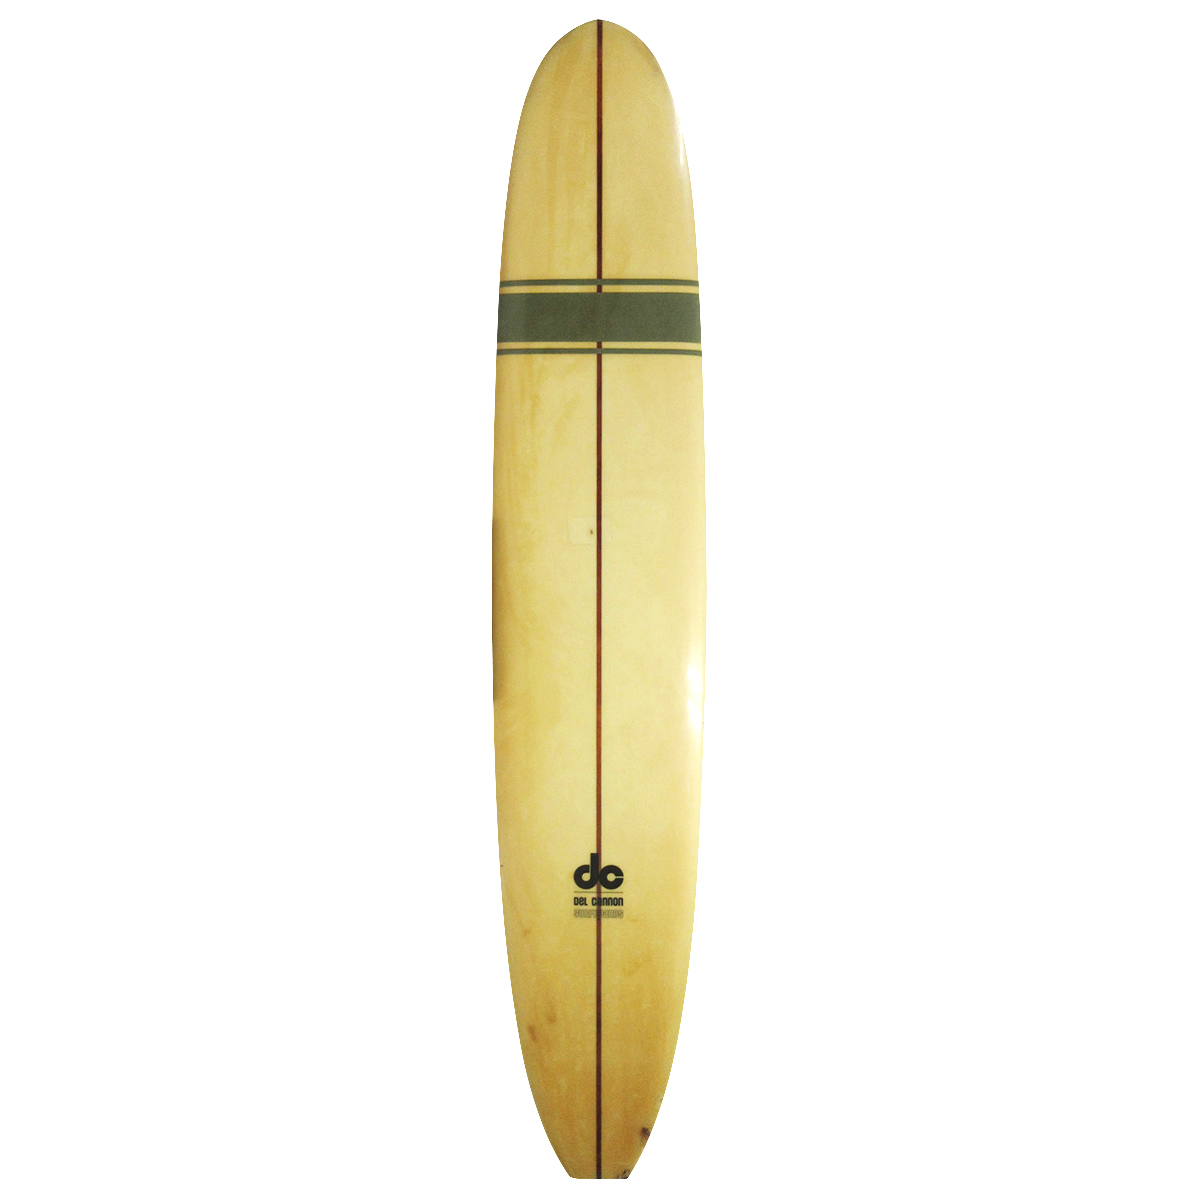  / DEL CANNON SURFBOARDS / 60`s LOG 